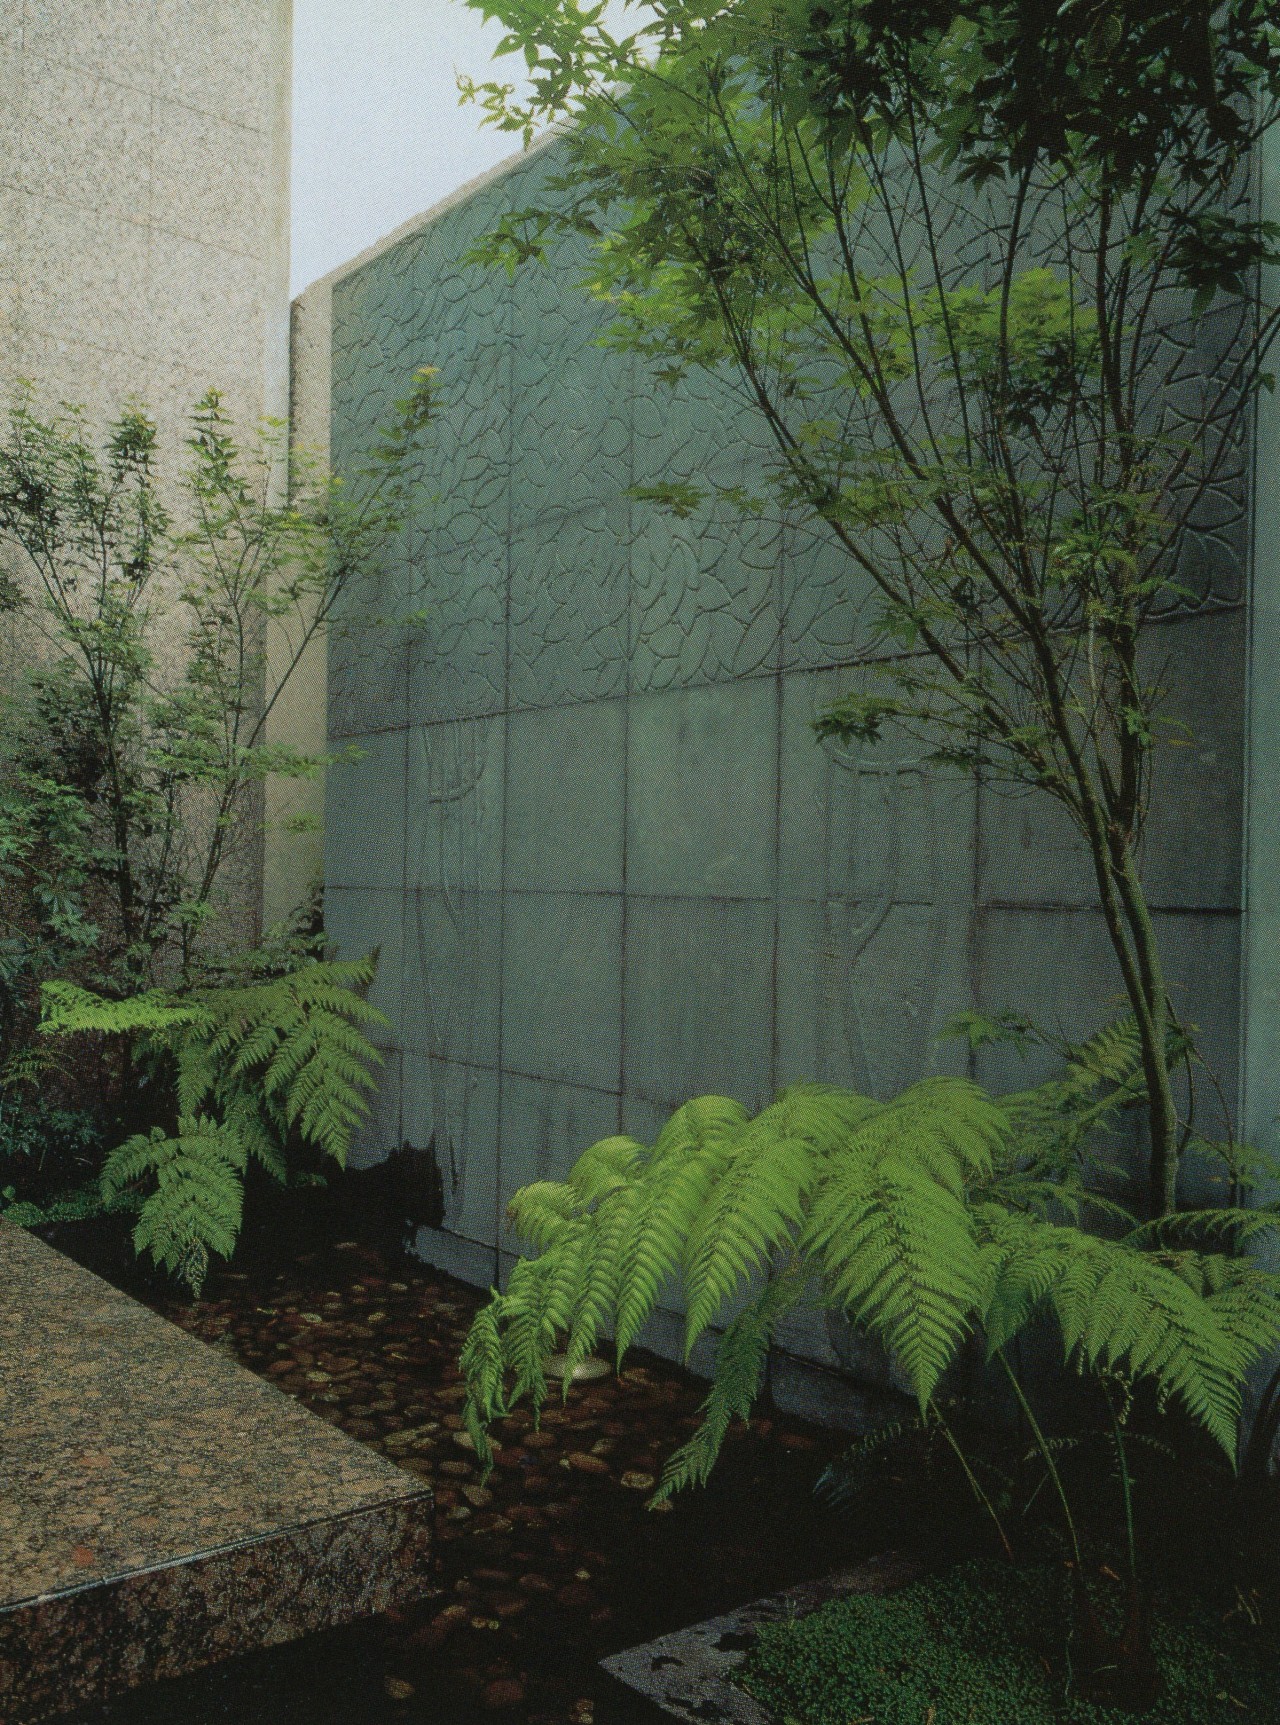 Standing out in relief against a facade of Huixquilucan stone are a fountain and its surrounding paving of recinto (volcanic) stone.Designing with Tile, Stone & Brick, 1995 #vintage#vintage interior#1990s#interior design#home decor#fountain#outdoor living#stone#volcanic#ferns#trees#pool#granite#contemporary#style#home#architecture